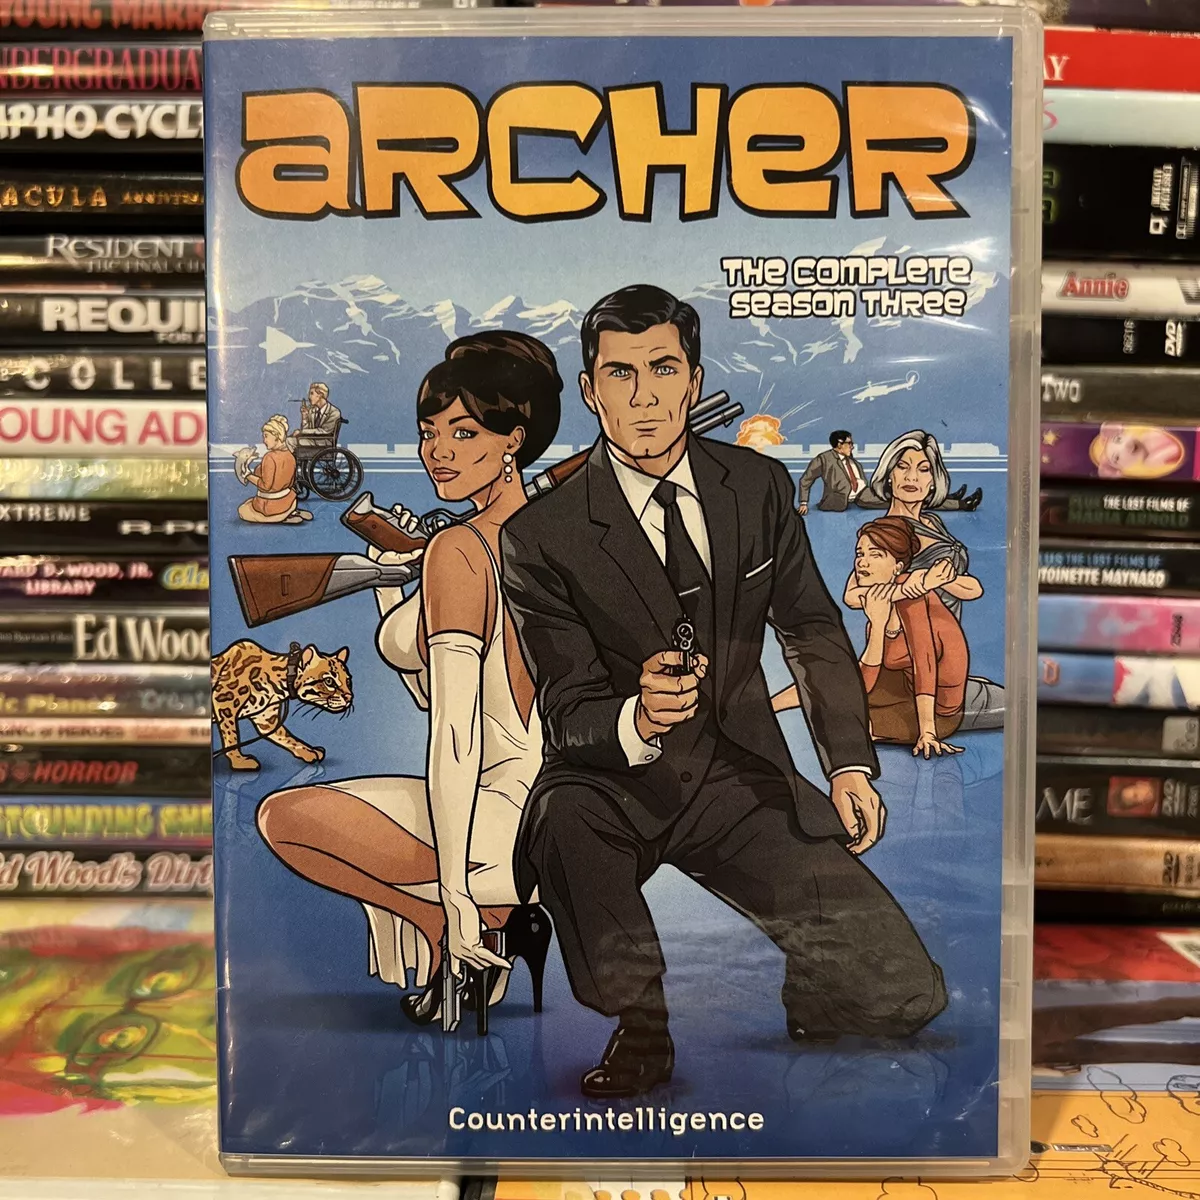 Archer (2009) Seasons 1-6 Blu-ray For Sale In Silverdale, picture image